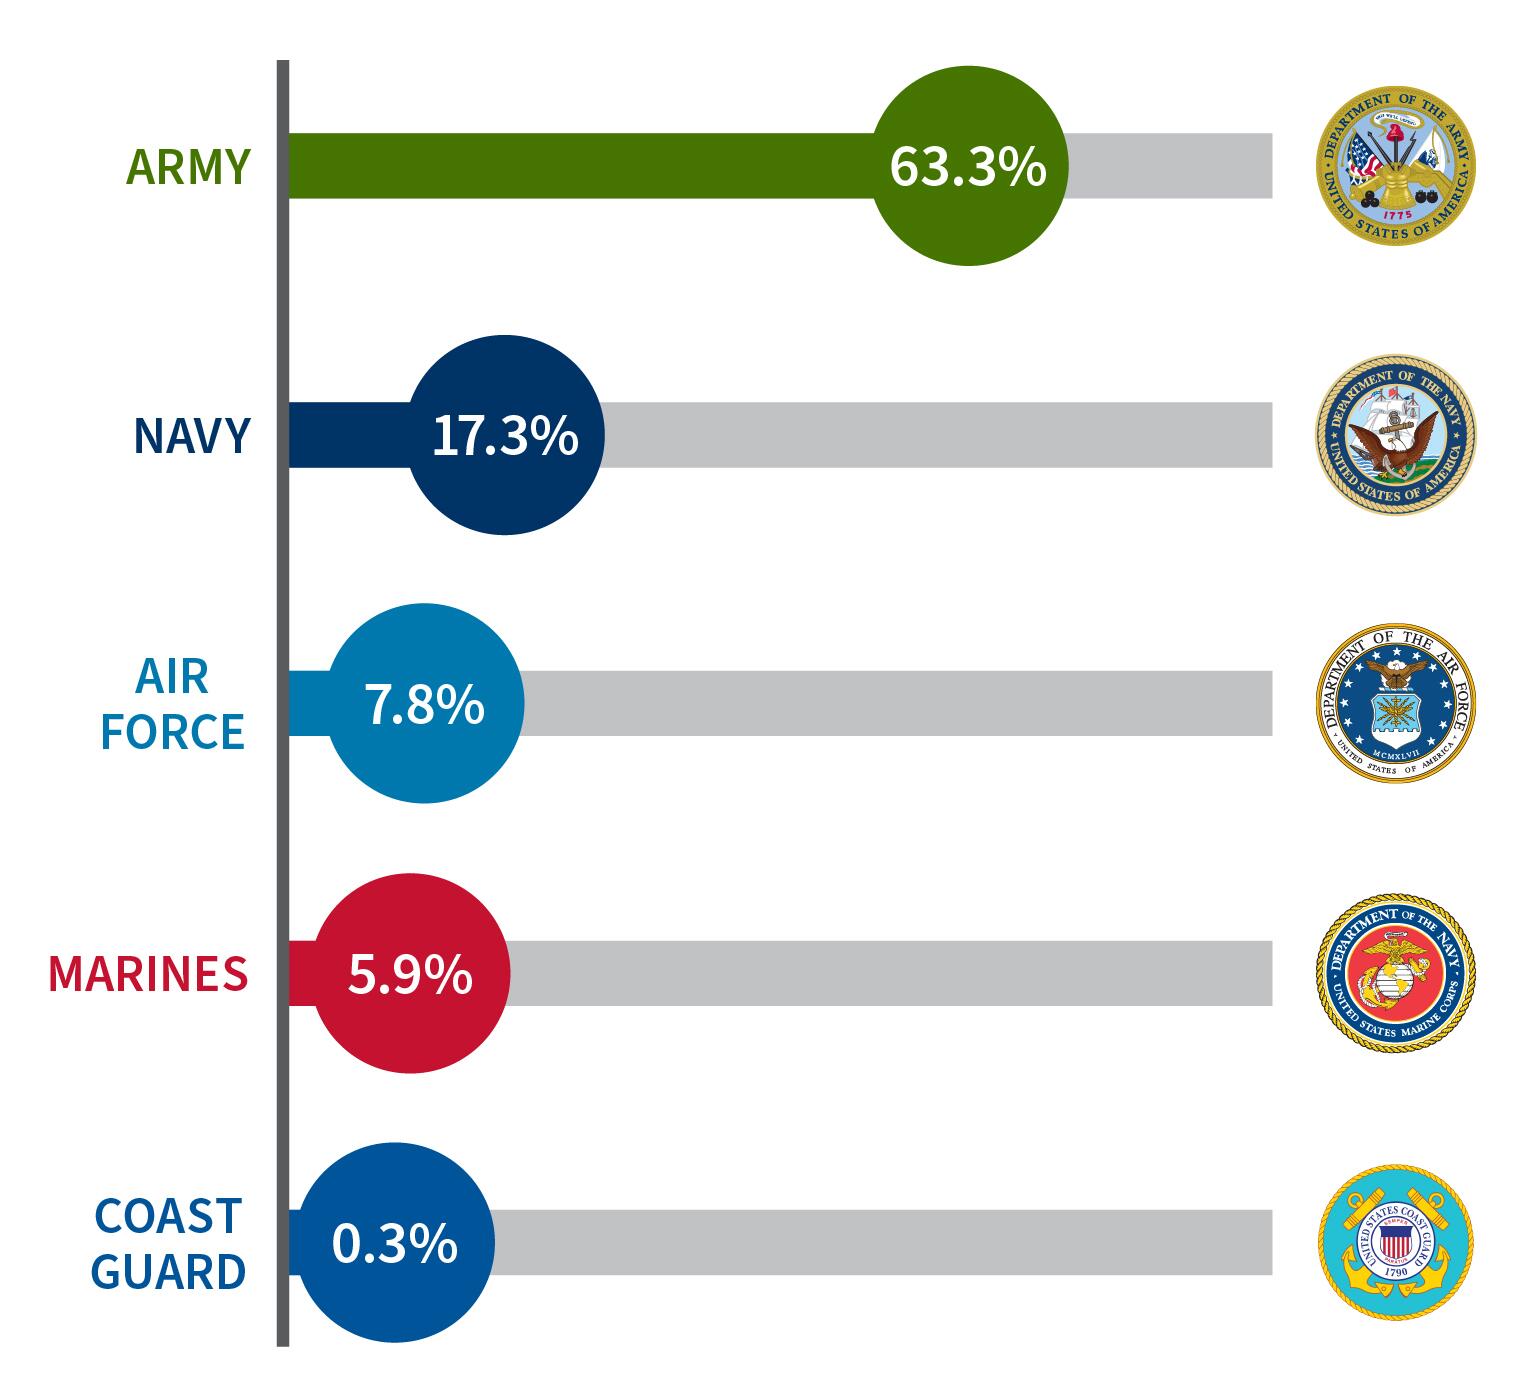 Graphic showing percentages by service branch, Army - 63.3, Navy - 17.3, Air Force - 7.8, Marines - 5.9, , Coast Guard - 0.3